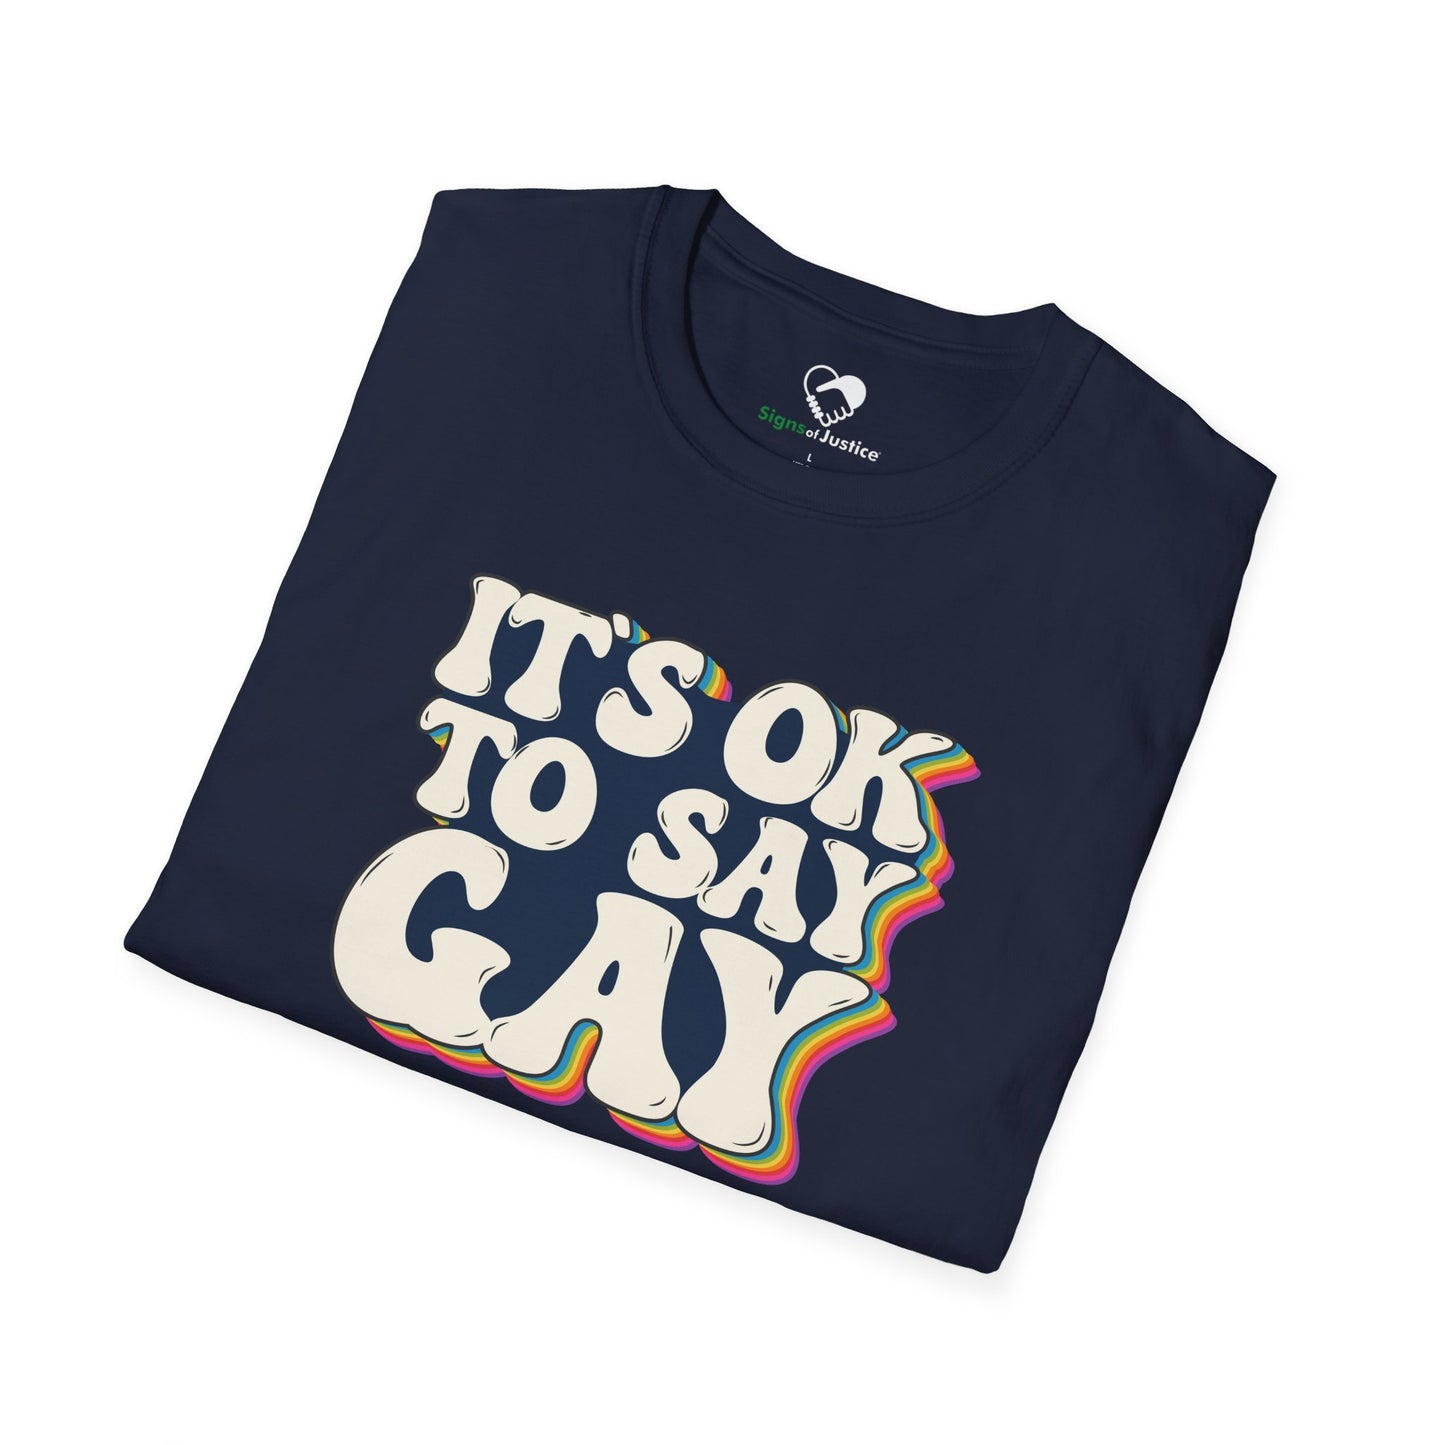 “It’s OK to Say Gay” Unisex T-Shirt